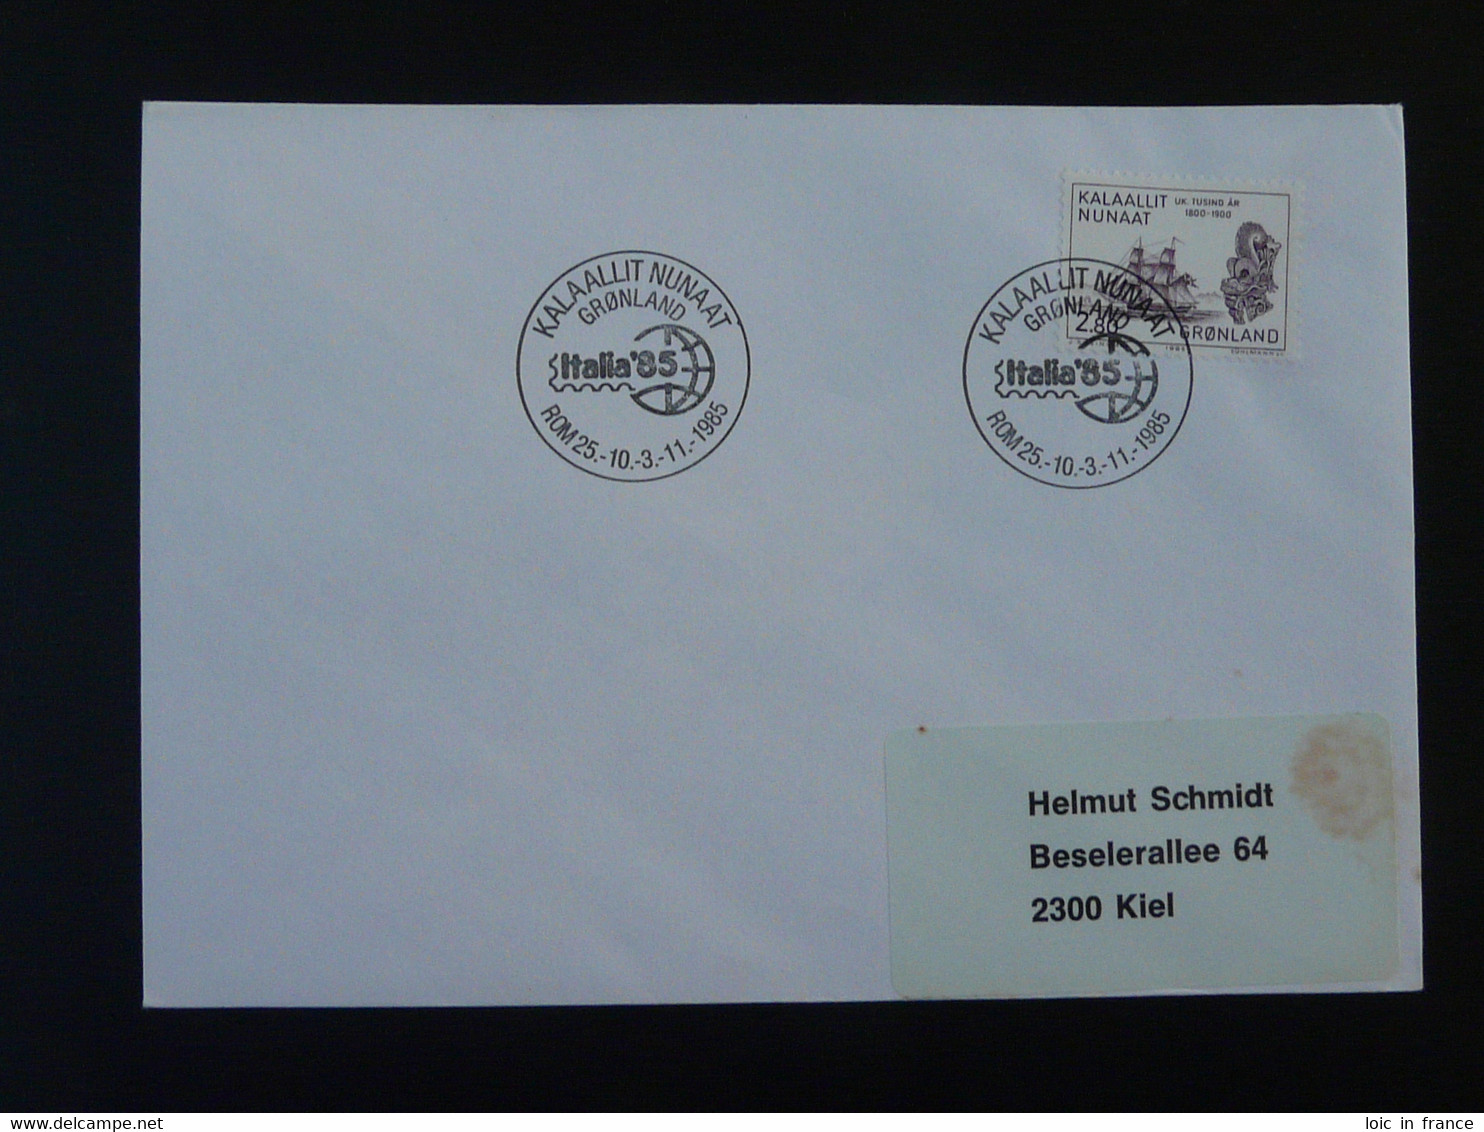 Lettre Cover Obliteration Postmark Italia 1985 Roma Groenland Greenland (ex 3) - Marcophilie